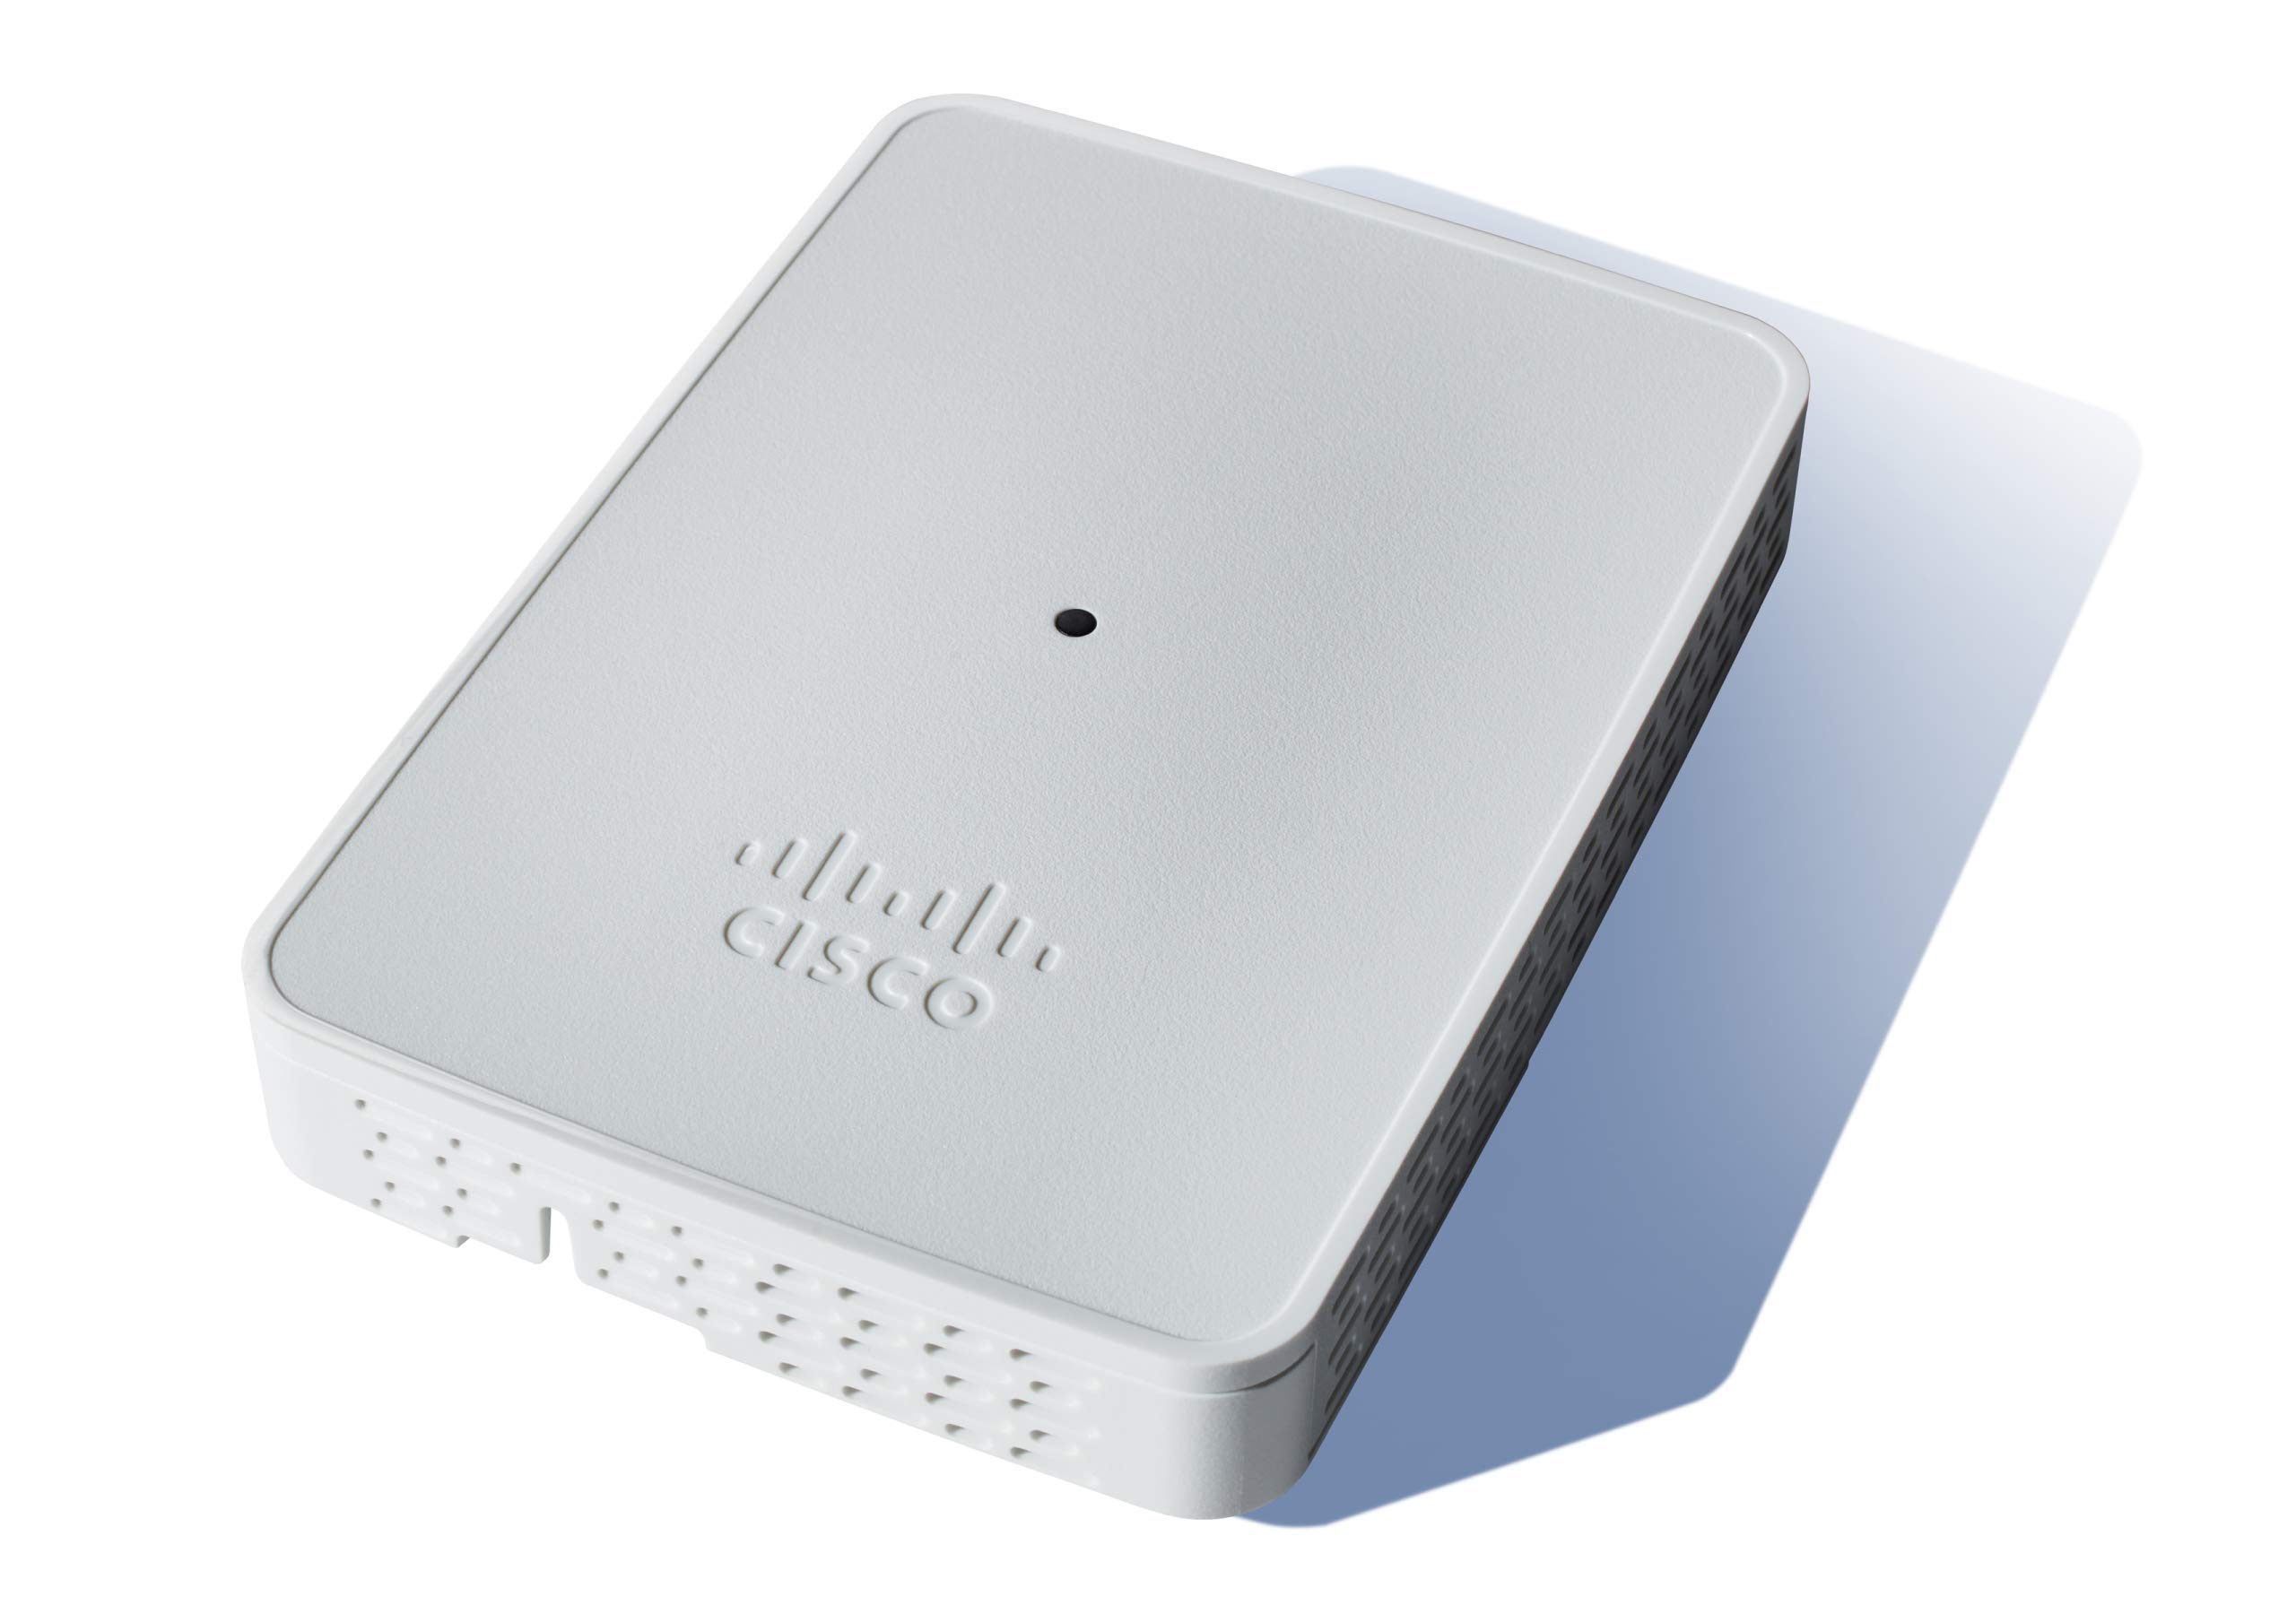 Cisco Business 143ACM Wi-Fi Mesh Extender, 802.11ac, 2x2, 1 GbE Port, Wall Mount, Limited Lifetime Protection (CBW143ACM-B-NA), Requires Cisco Business Wireless Access Points